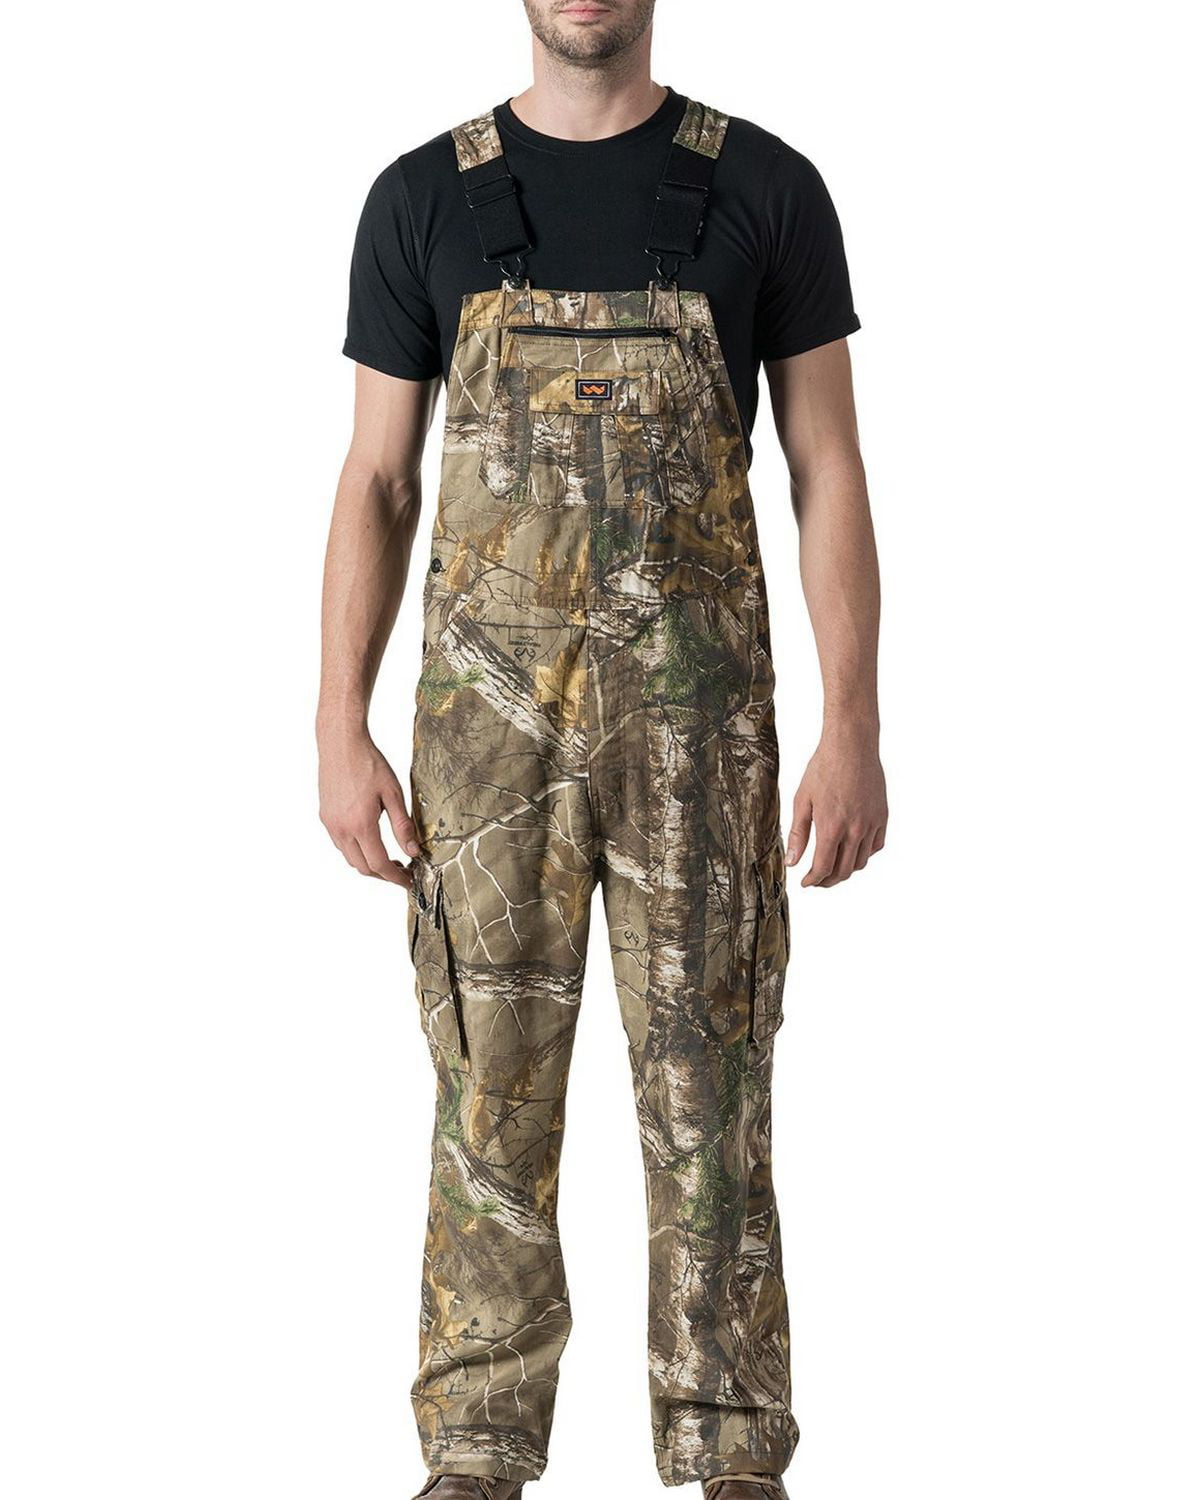 Walls Outdoors Men’s Camo Bib Overalls Hunting New With Tags Med Reg 